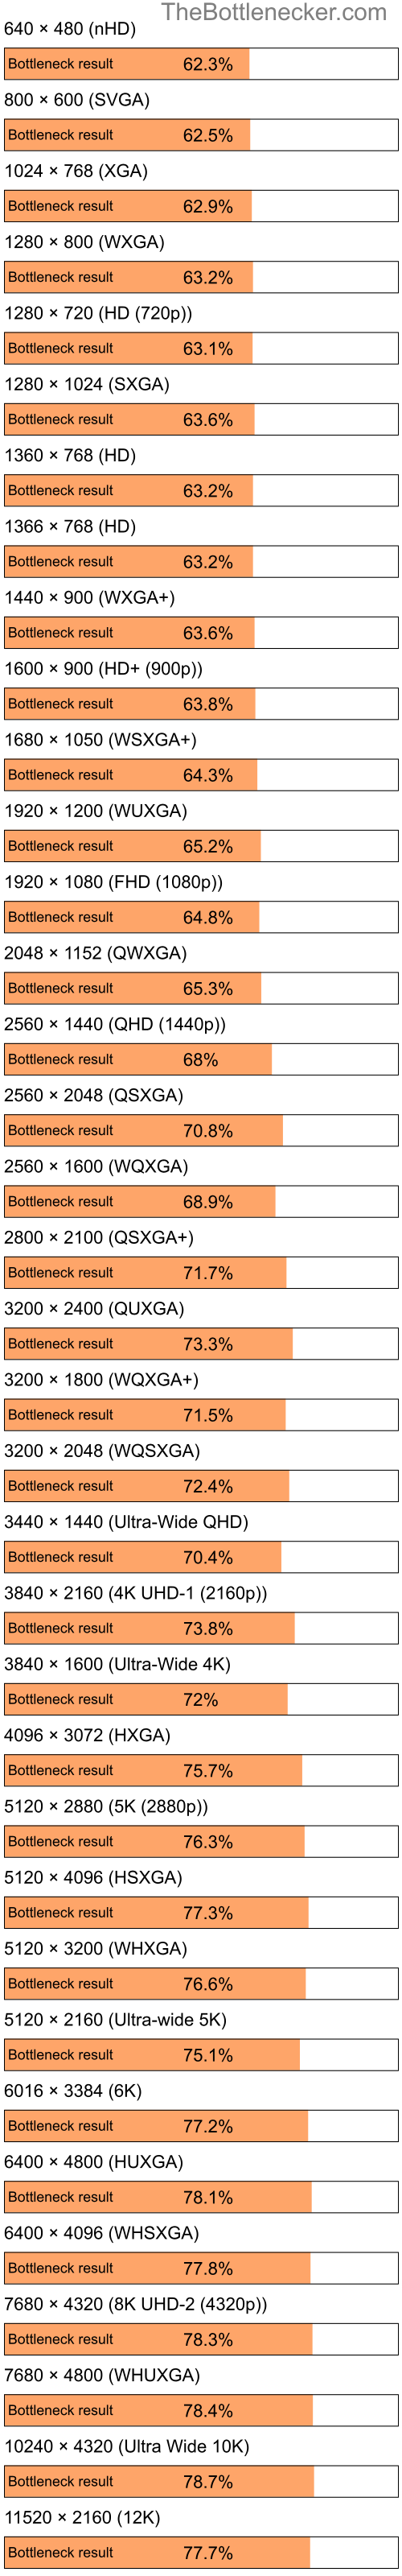 Bottleneck results by resolution for Intel Pentium 4 and AMD Radeon HD 4270 in7 Days to Die